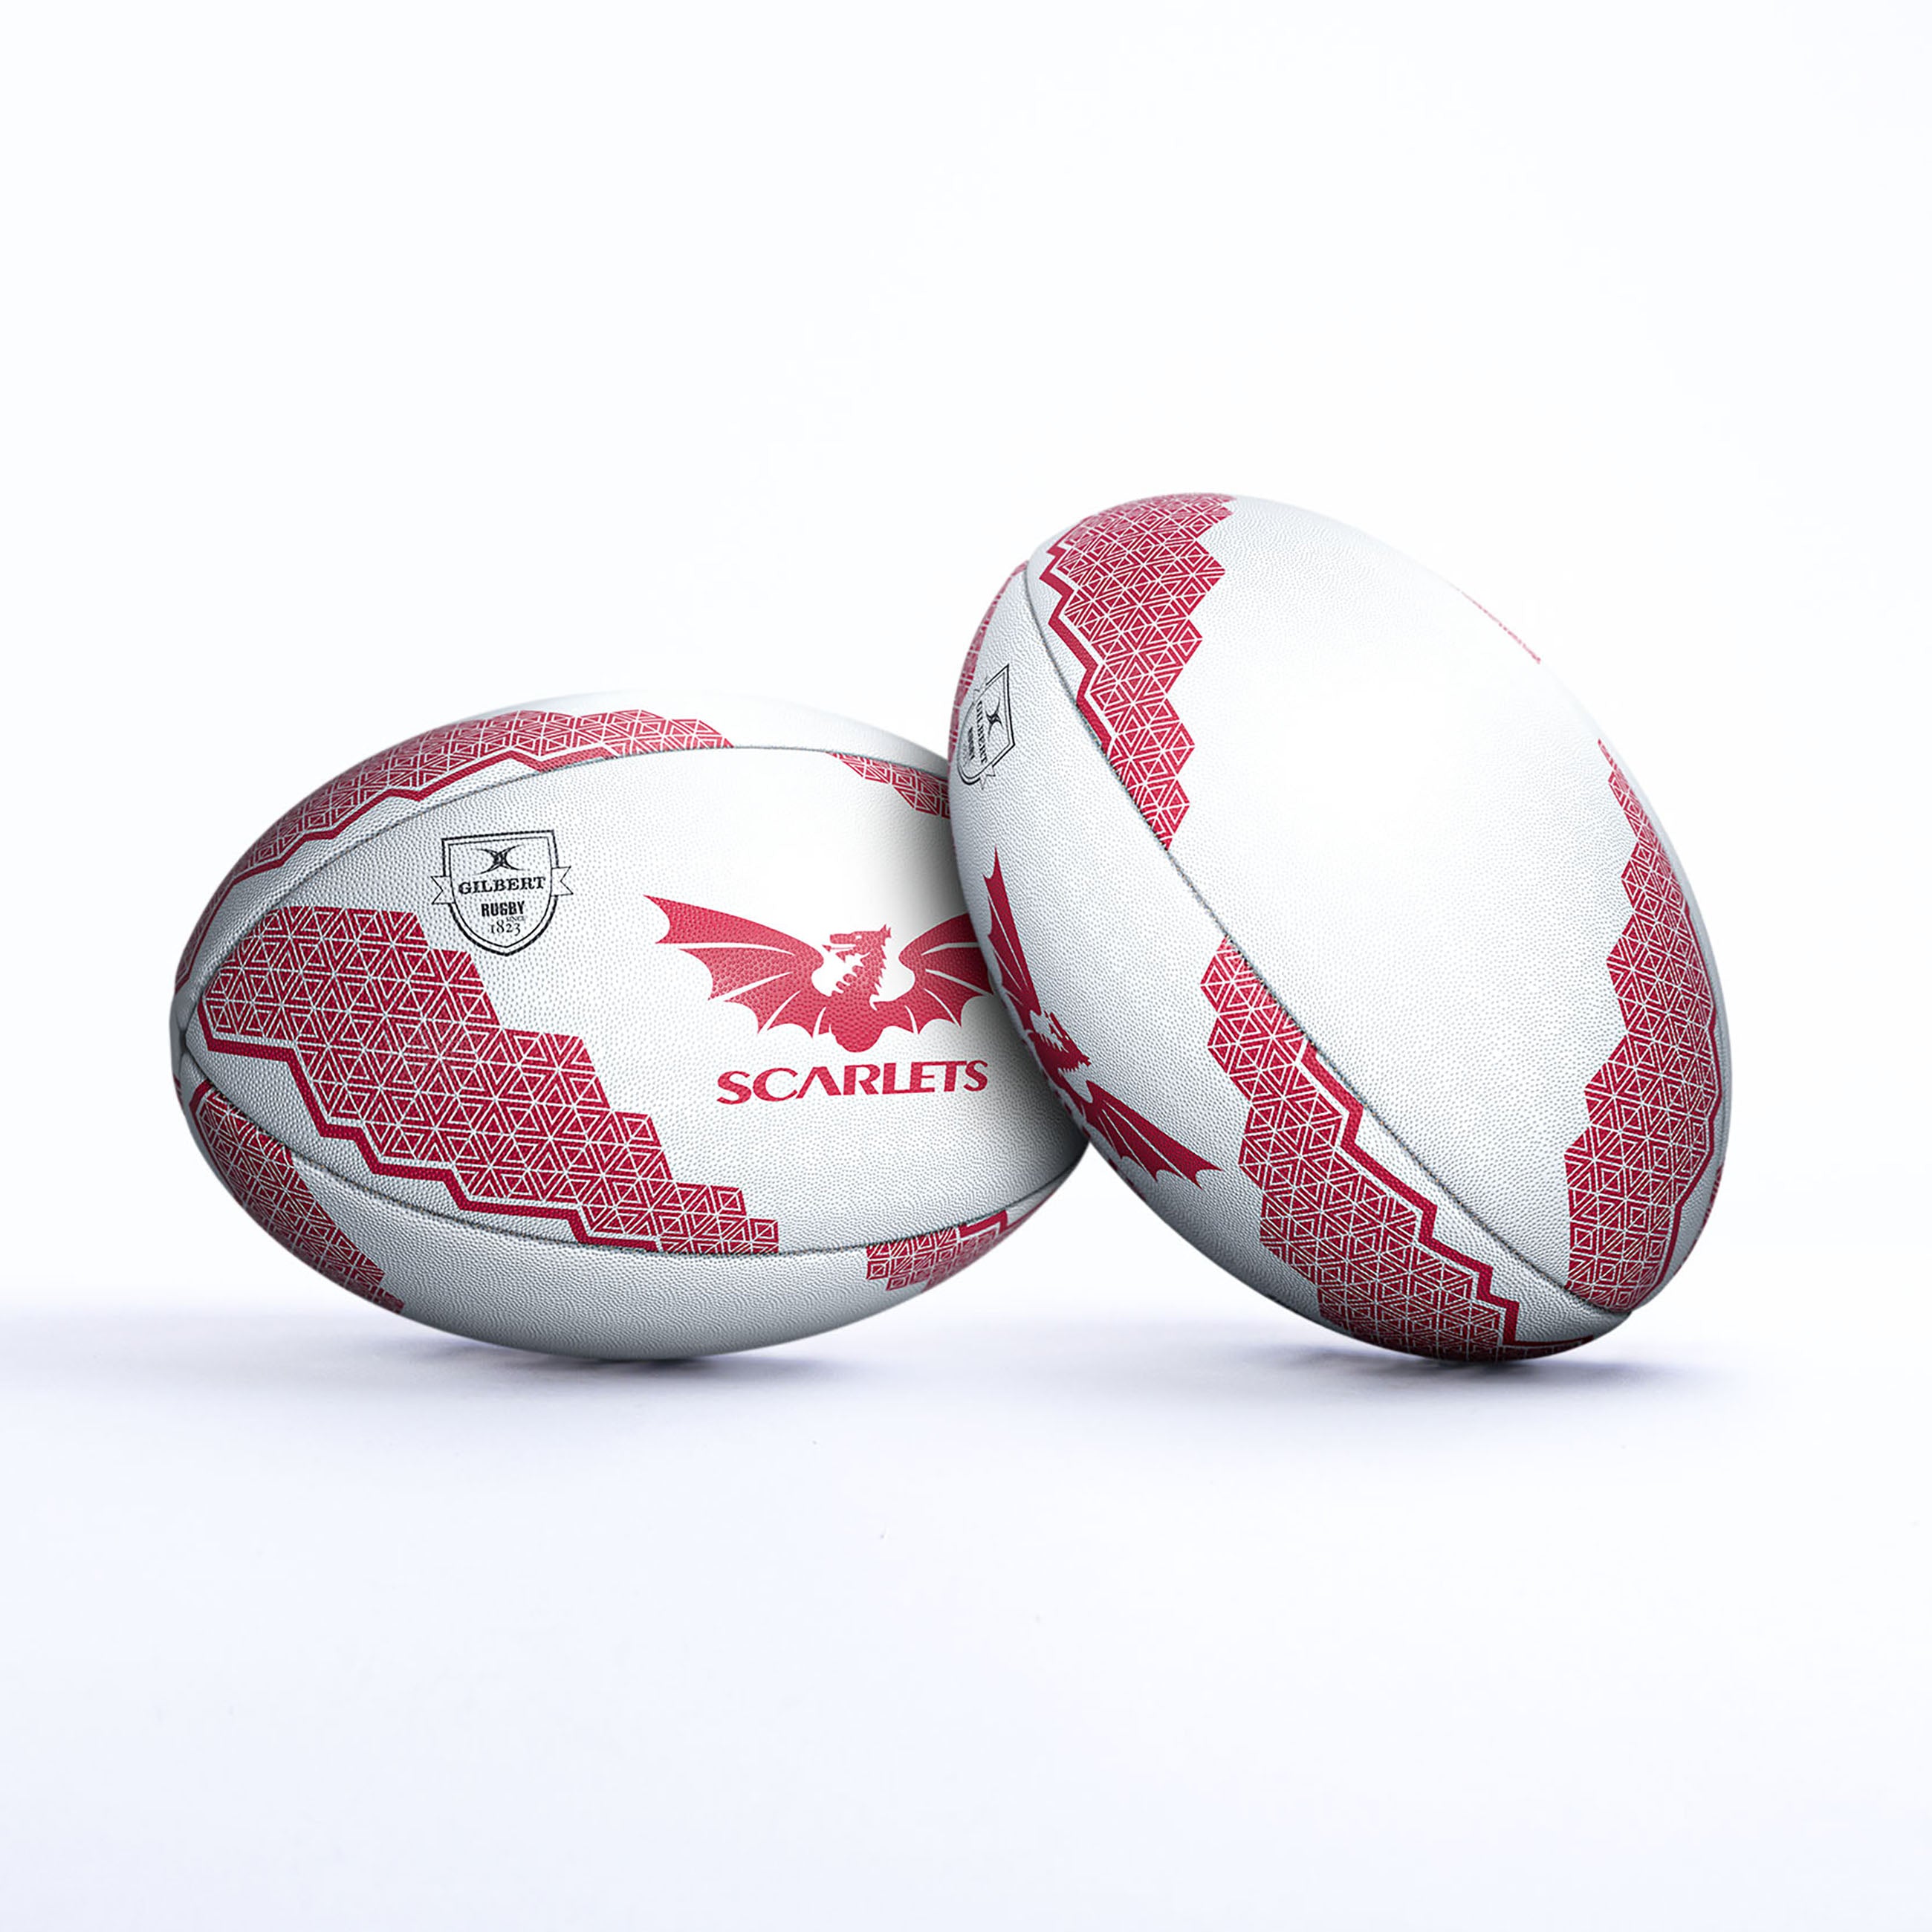 Scarlets Supporter Ball